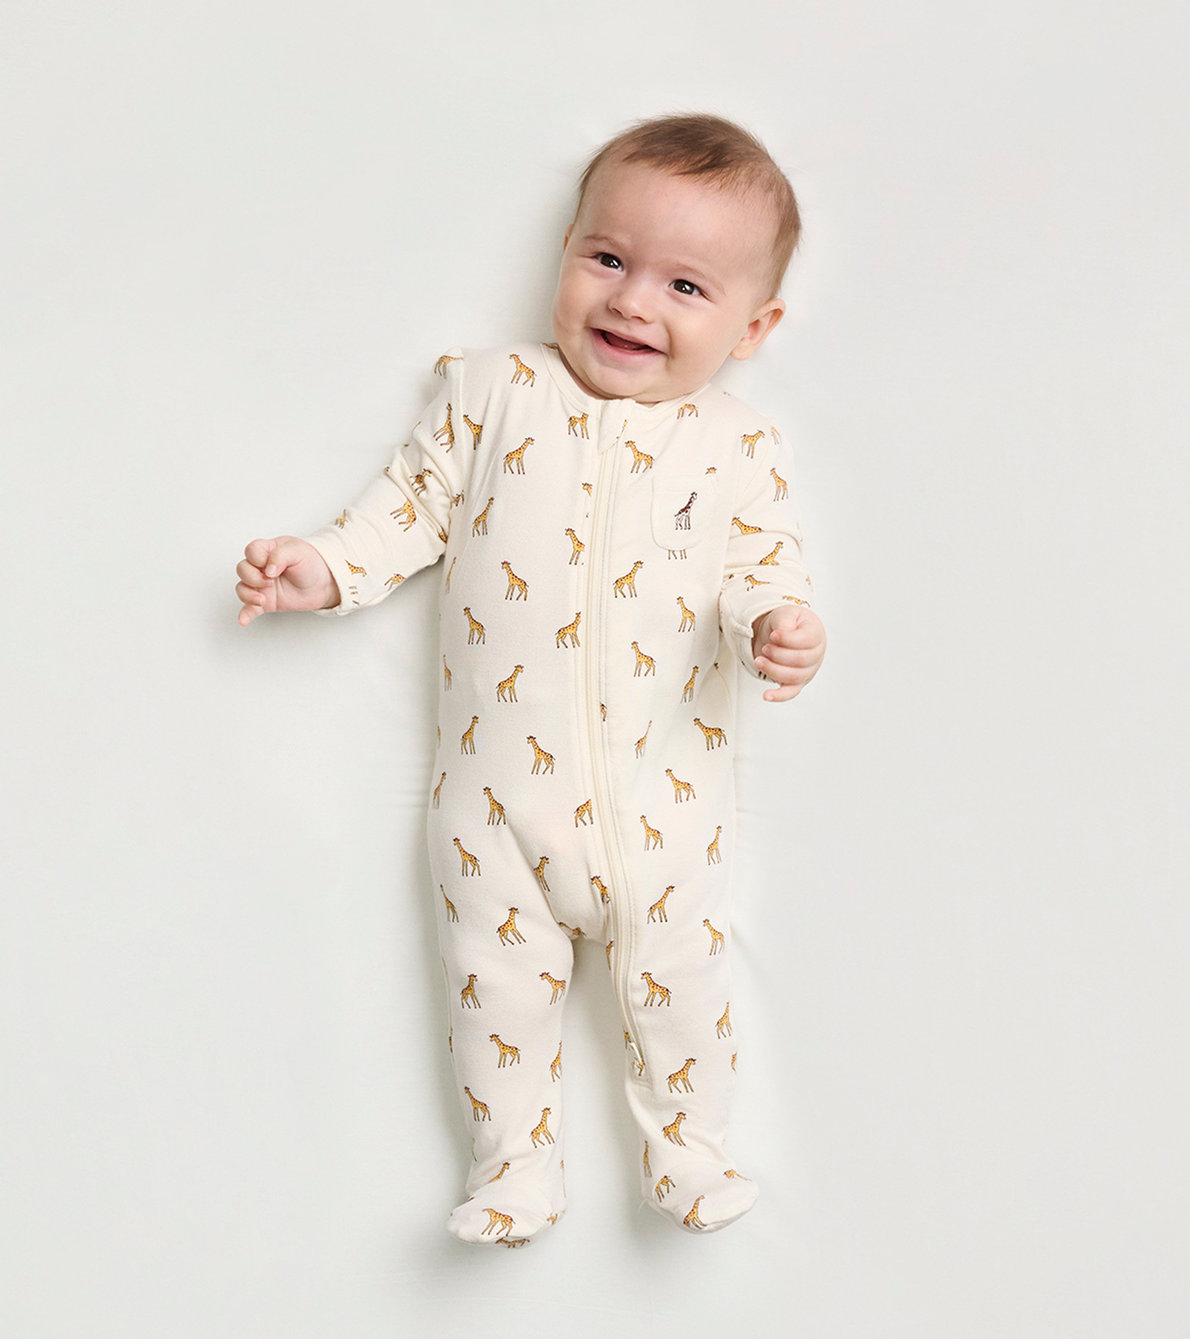 View larger image of Little Giraffes Baby Footed Coverall